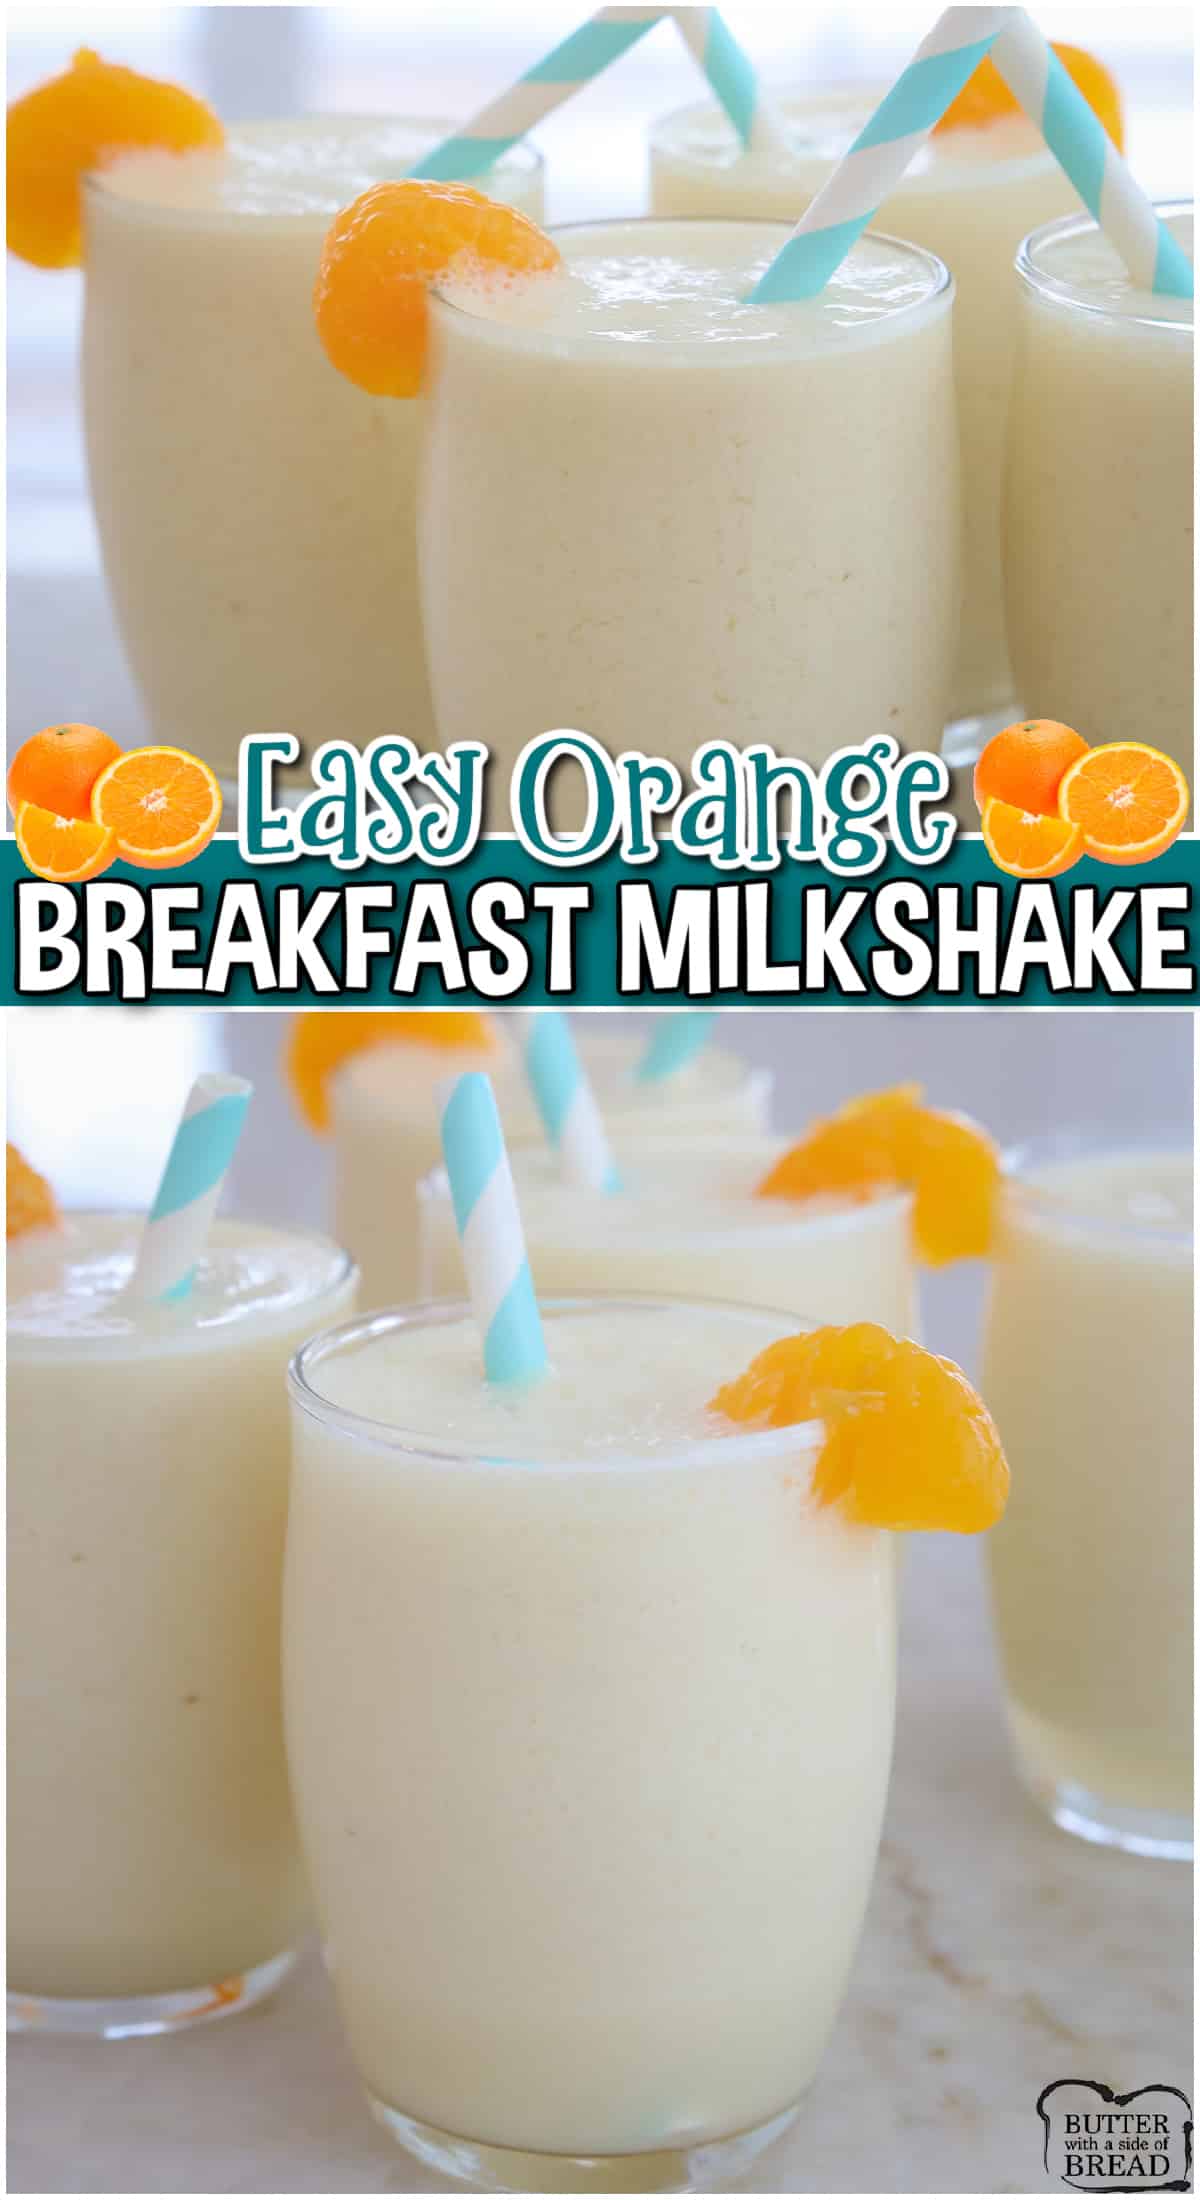 Orange Breakfast Milkshake made with orange juice concentrate, frozen banana, milk, & ice cubes; this orange banana smoothie is a great way to start the day!